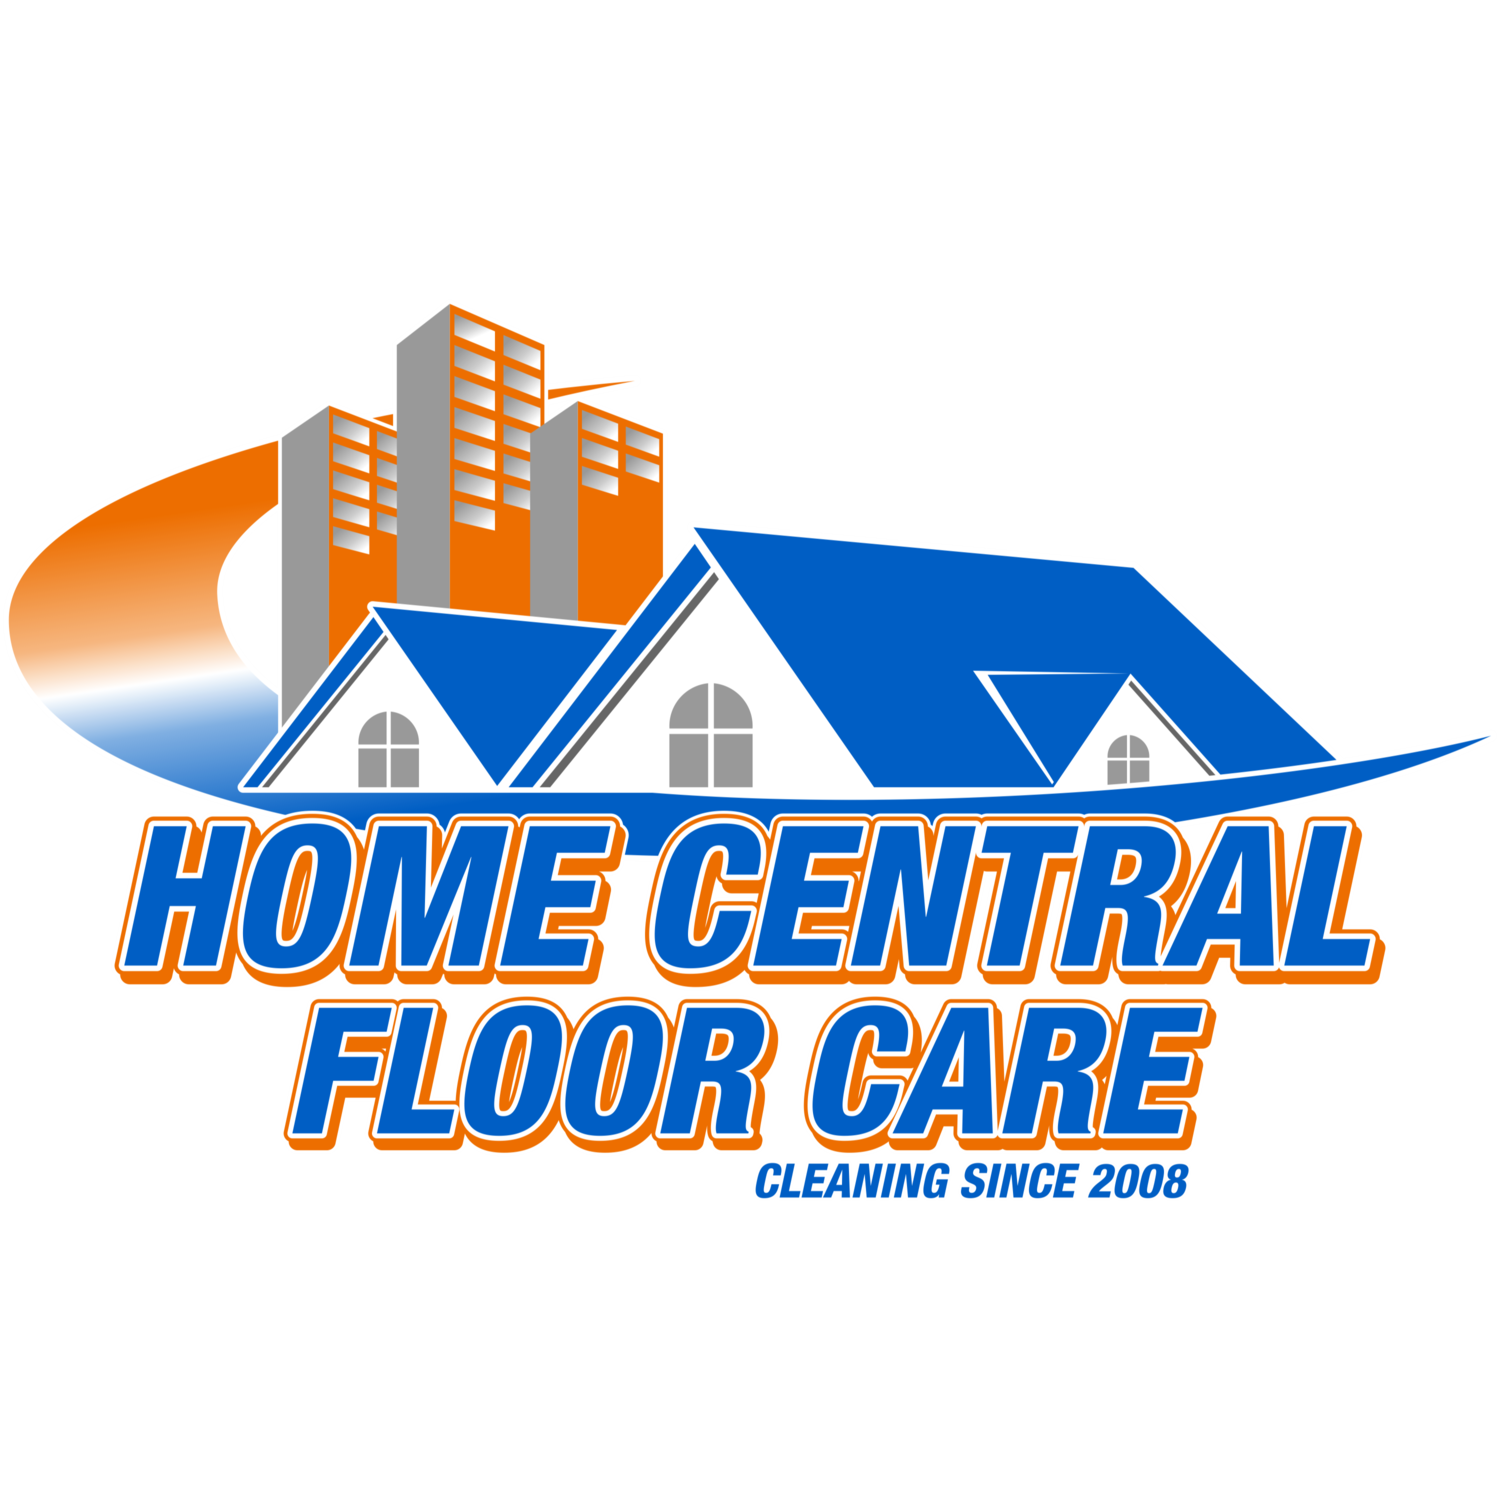 Home Central Floor Care